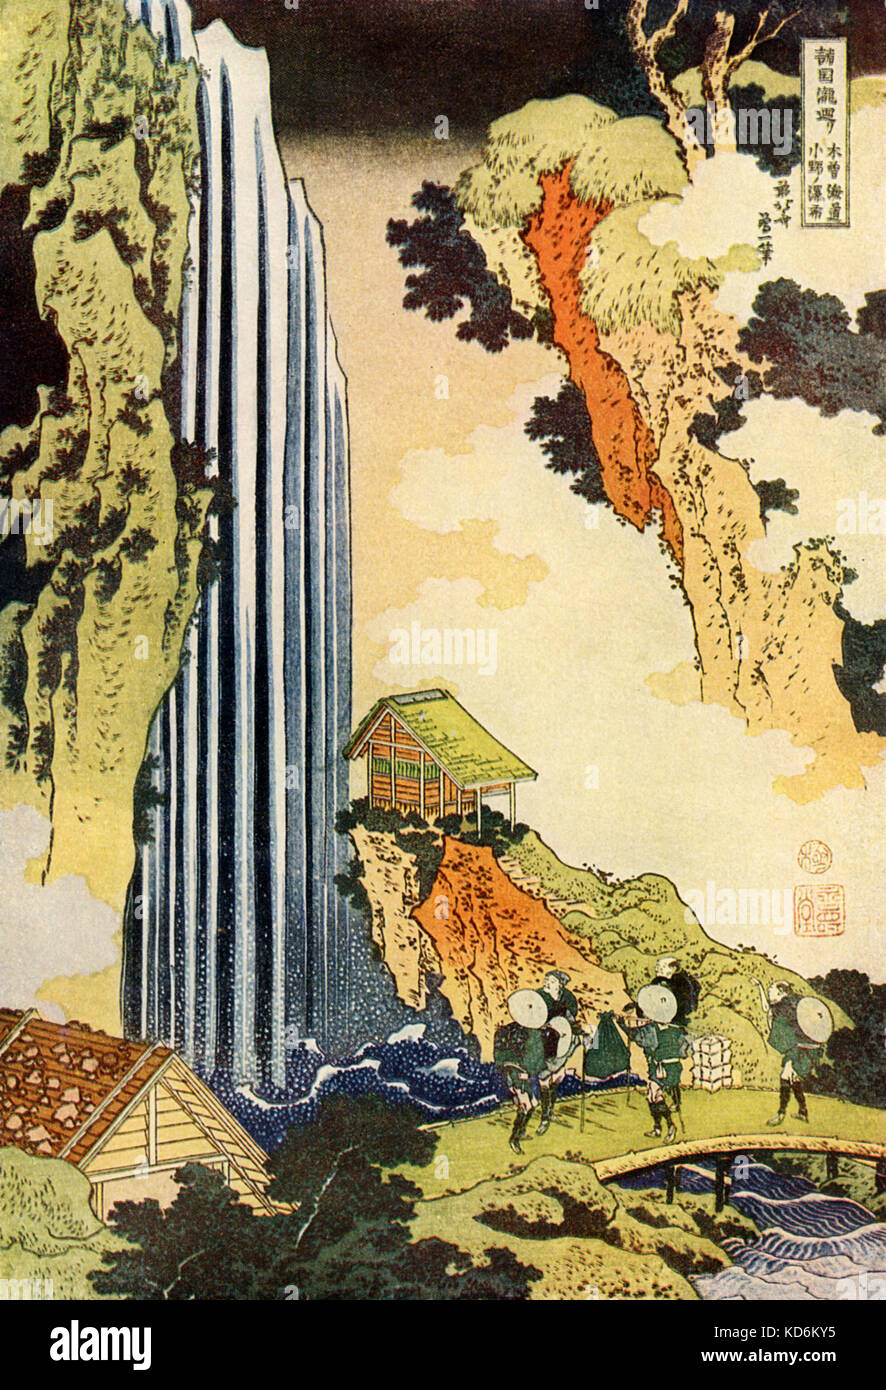 Japanese waterfall, with bridge and houses. By Hokusai Katsushaka (1760 - 1849).  Puccini, Madama Butterfly connection.  Ravel connection.  Landscape.  Japan.  Nature.  Flowing water. Stock Photo